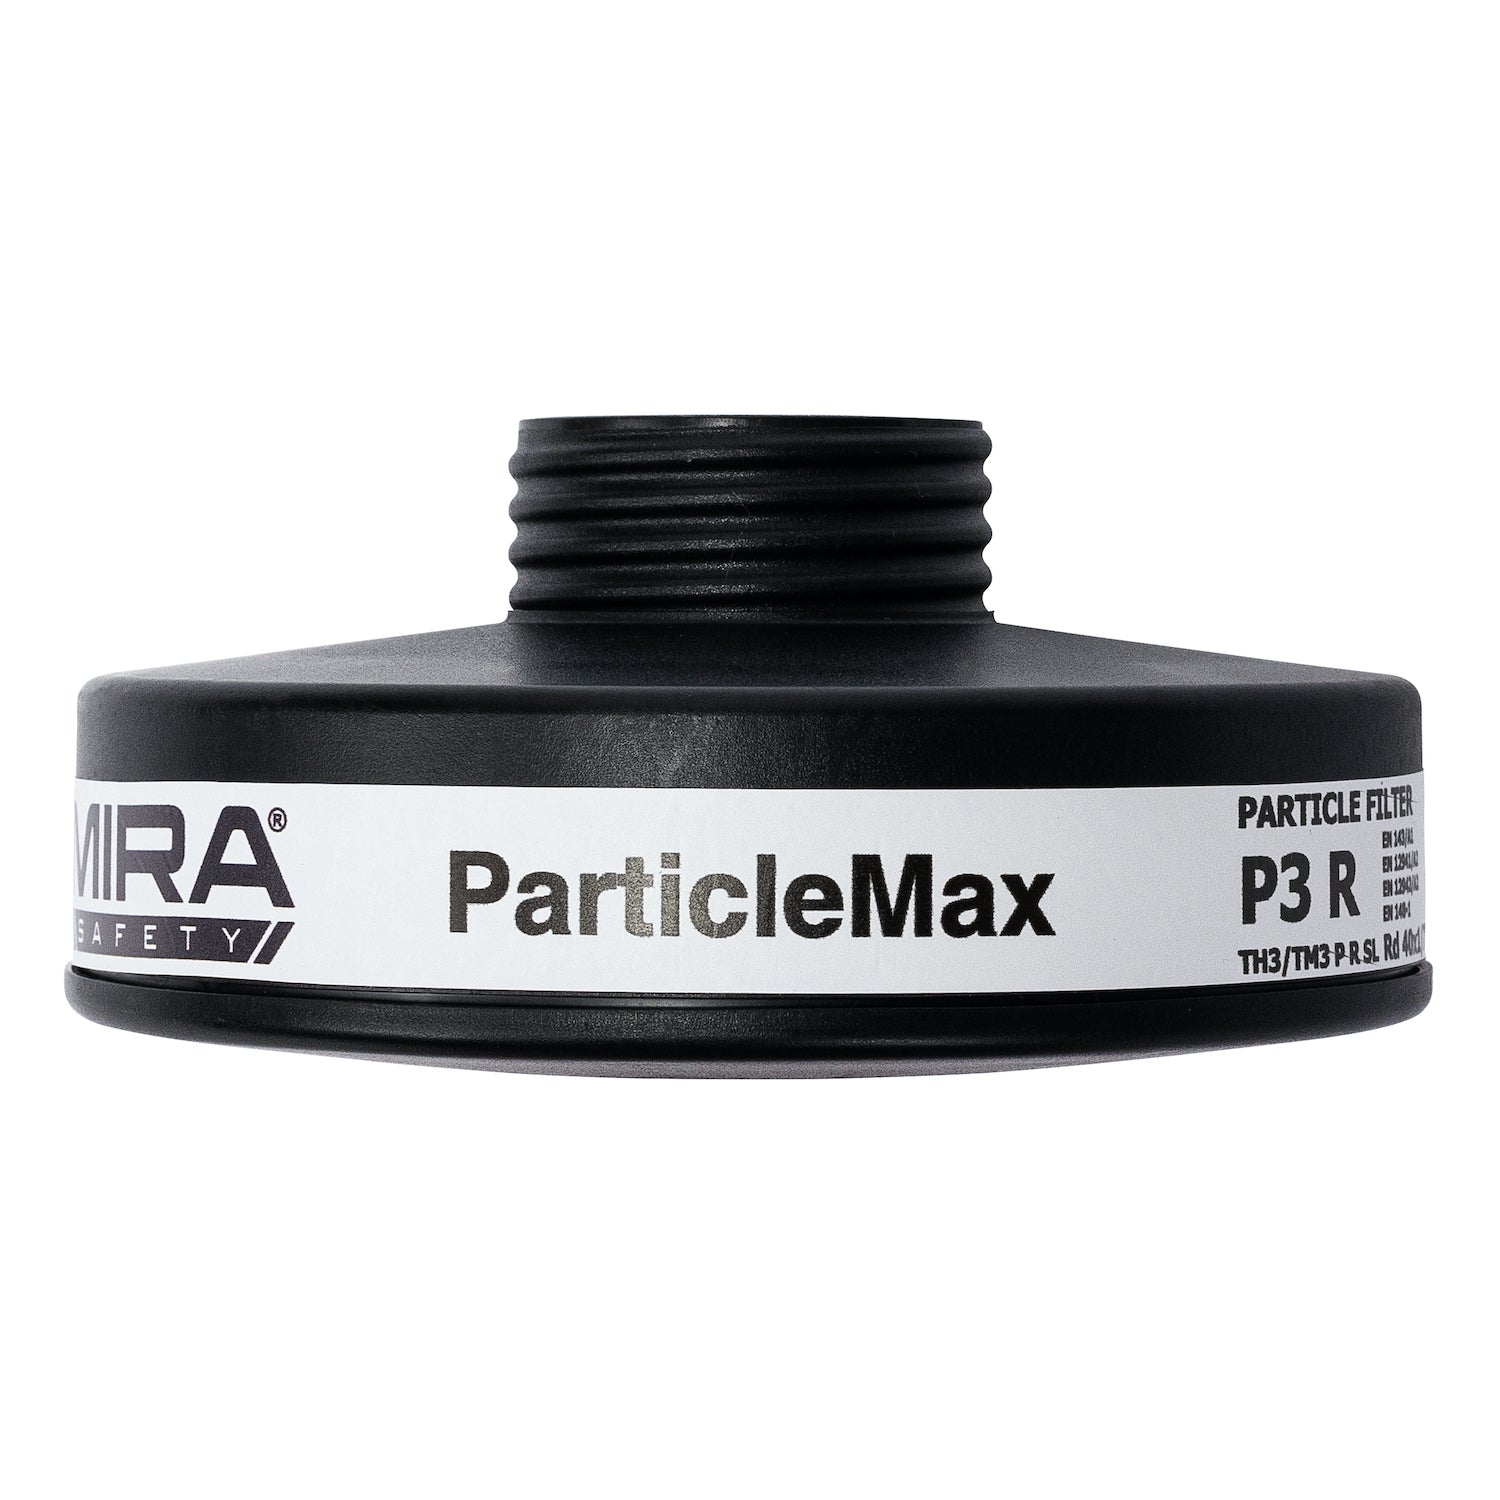 Respirator Filter For Gas Masks | ParticleMax P3 Particle Filter